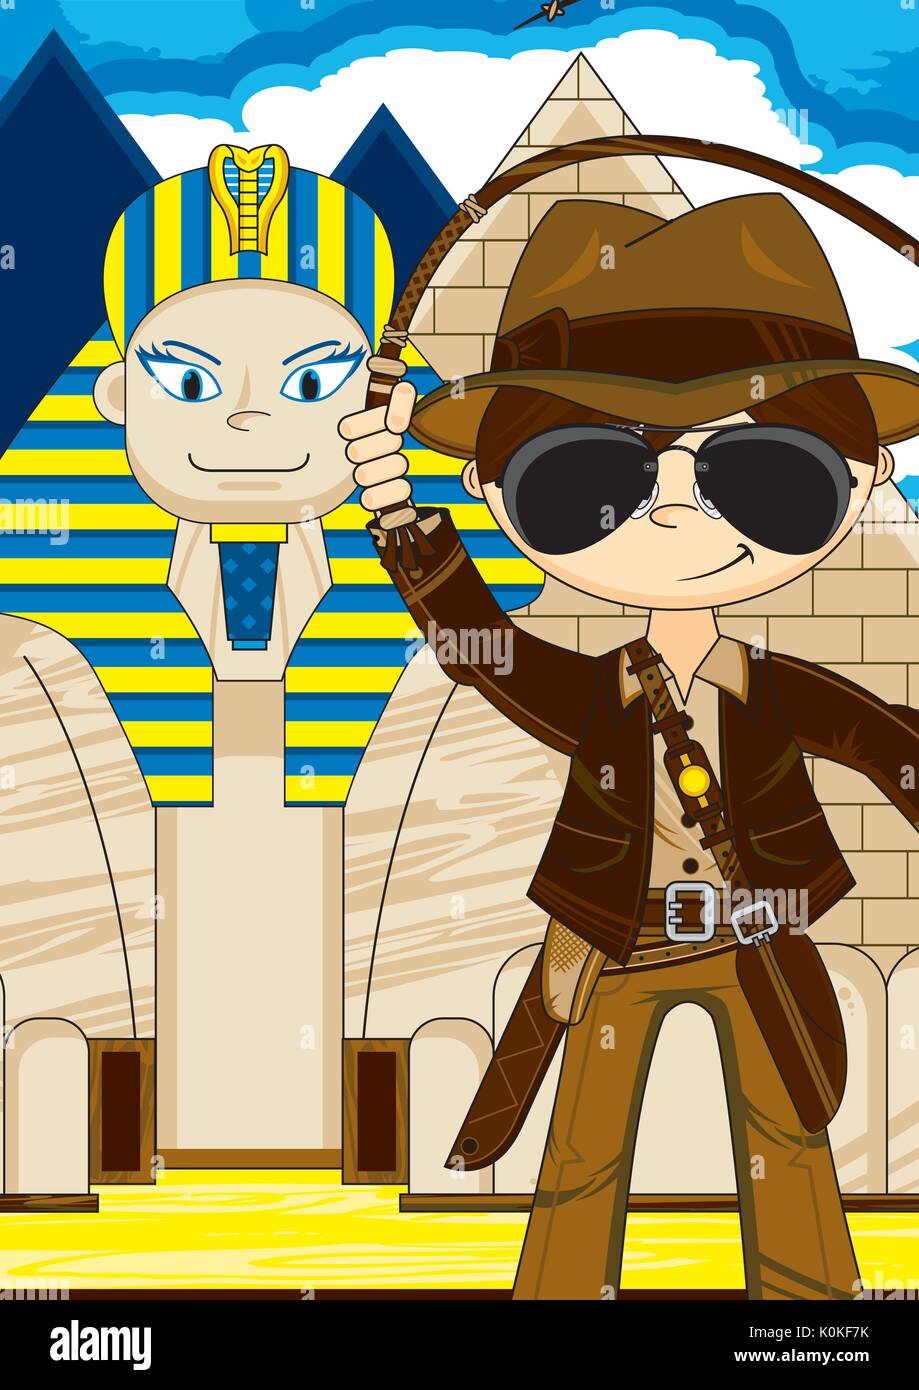 Cartoon Explorer Character with Egyptian Sphinx and Pyramid Illustration Stock Vector